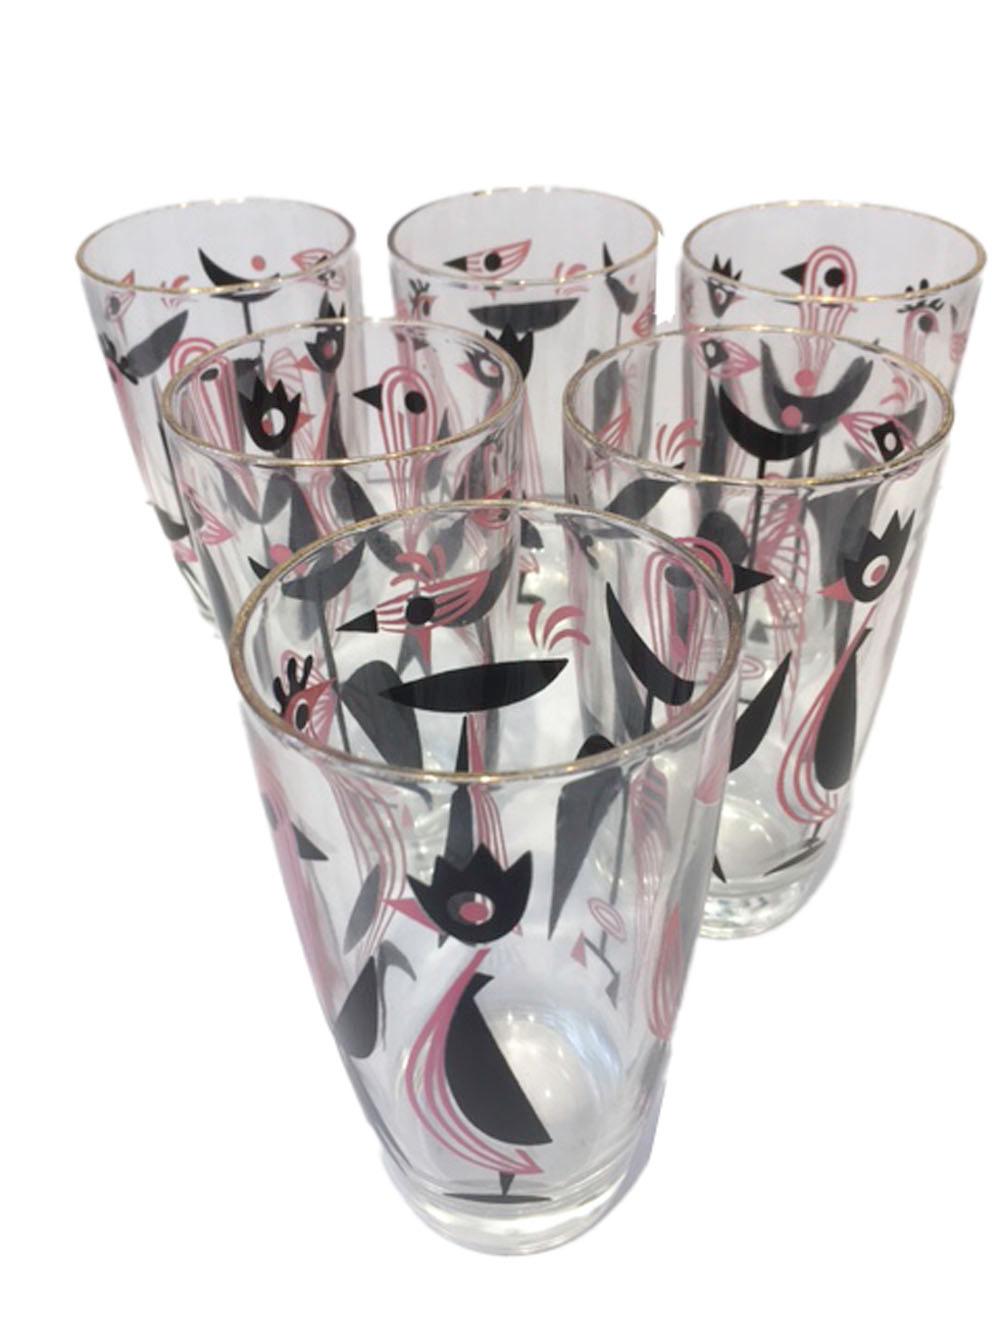 American Vintage Art Deco 11 Piece Dyball Cocktail Set with Pink and Black Stylized Birds